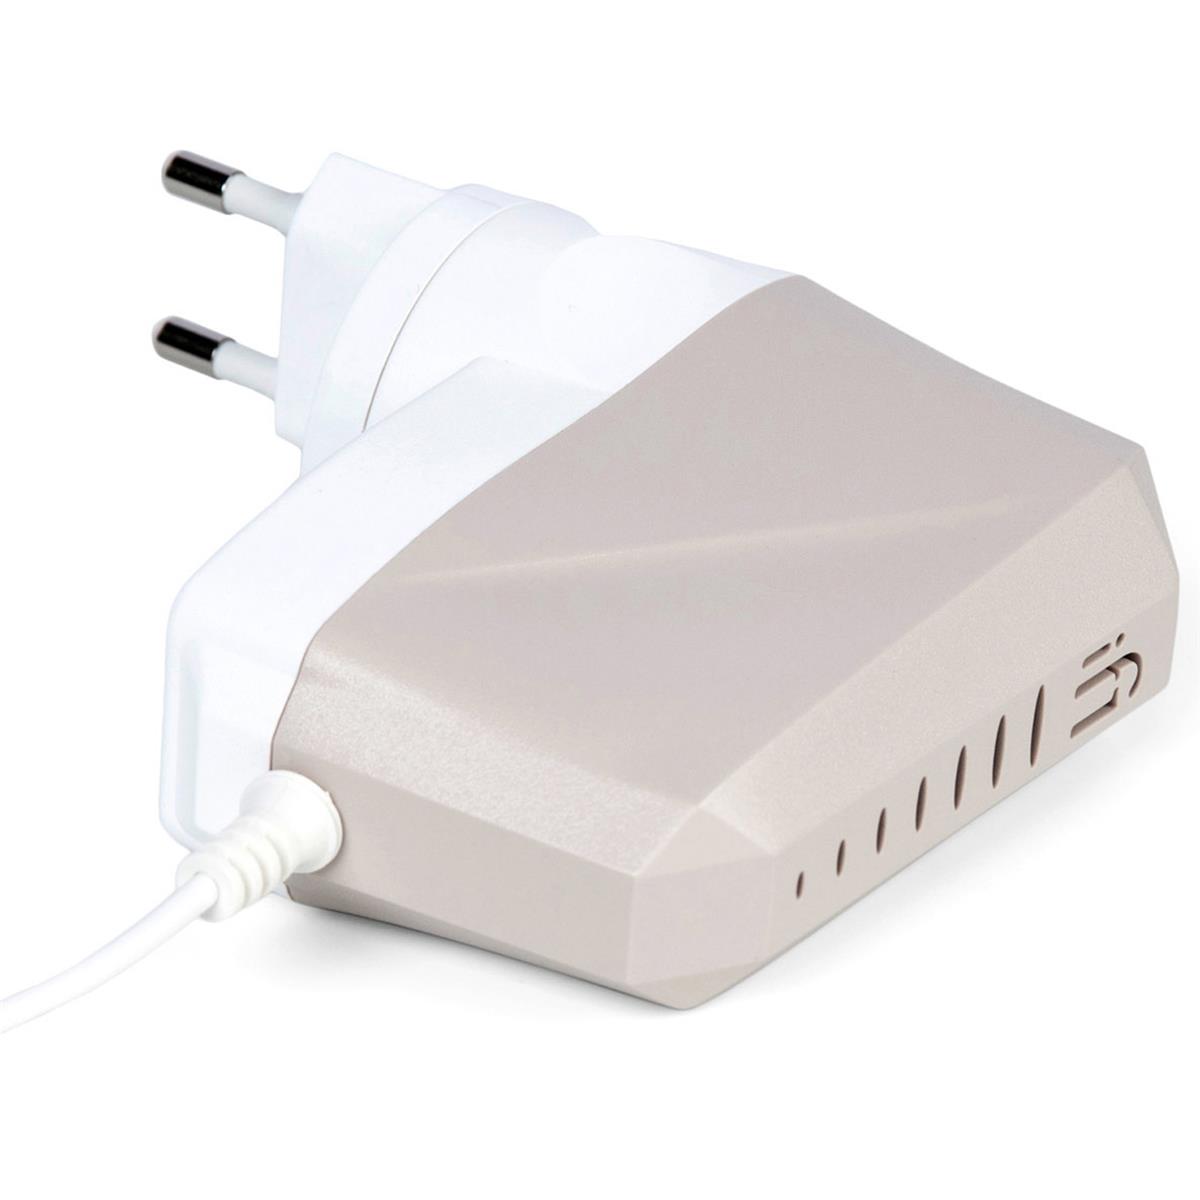 Image of iFi AUDIO iPower X 5V 3A Universal Power Adapter